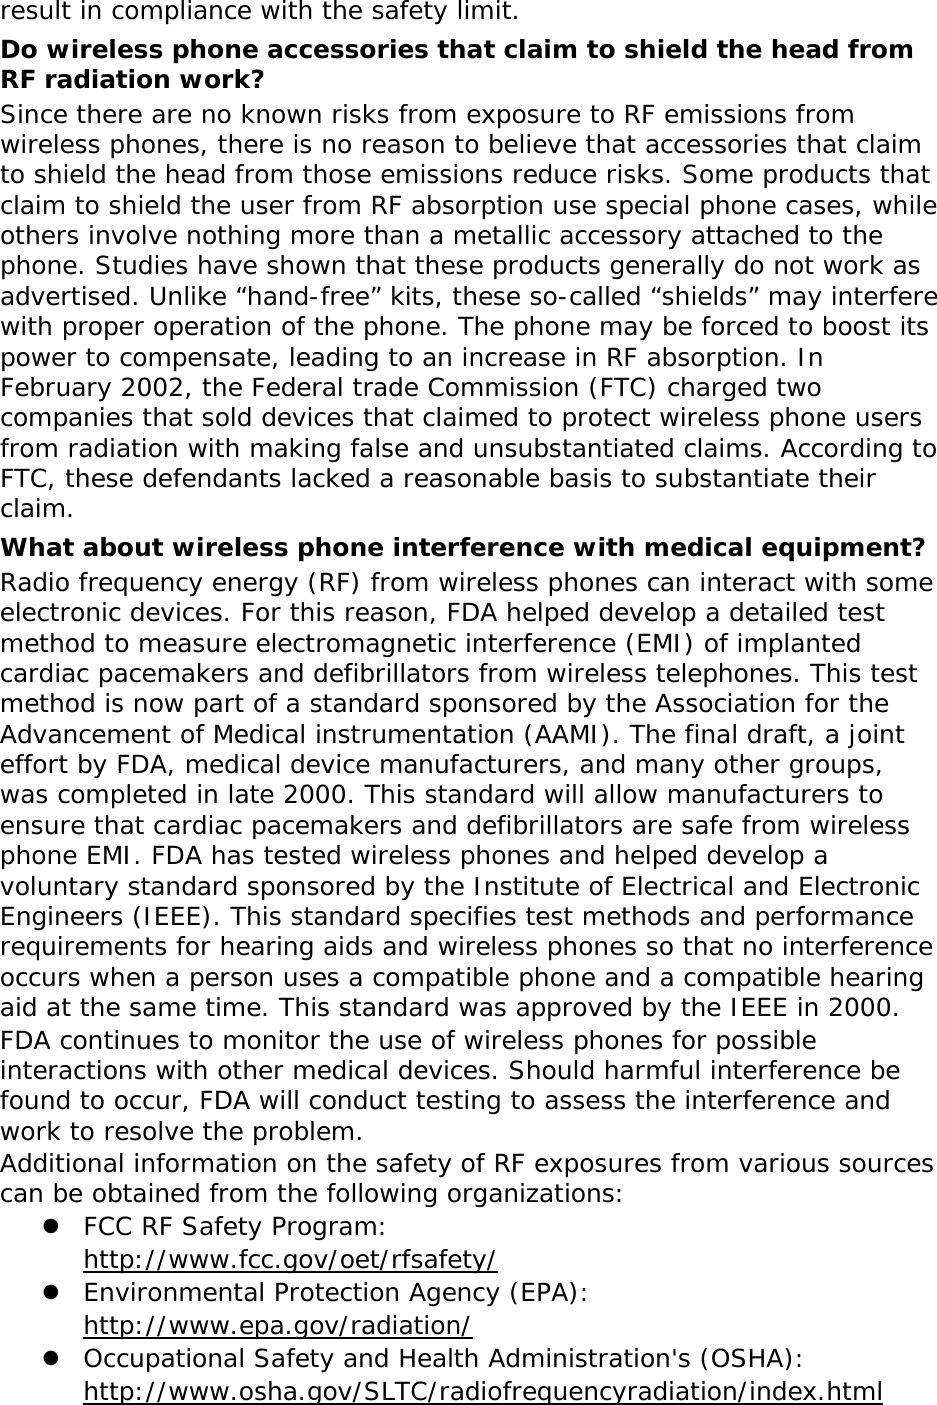 result in compliance with the safety limit. Do wireless phone accessories that claim to shield the head from RF radiation work? Since there are no known risks from exposure to RF emissions from wireless phones, there is no reason to believe that accessories that claim to shield the head from those emissions reduce risks. Some products that claim to shield the user from RF absorption use special phone cases, while others involve nothing more than a metallic accessory attached to the phone. Studies have shown that these products generally do not work as advertised. Unlike “hand-free” kits, these so-called “shields” may interfere with proper operation of the phone. The phone may be forced to boost its power to compensate, leading to an increase in RF absorption. In February 2002, the Federal trade Commission (FTC) charged two companies that sold devices that claimed to protect wireless phone users from radiation with making false and unsubstantiated claims. According to FTC, these defendants lacked a reasonable basis to substantiate their claim. What about wireless phone interference with medical equipment? Radio frequency energy (RF) from wireless phones can interact with some electronic devices. For this reason, FDA helped develop a detailed test method to measure electromagnetic interference (EMI) of implanted cardiac pacemakers and defibrillators from wireless telephones. This test method is now part of a standard sponsored by the Association for the Advancement of Medical instrumentation (AAMI). The final draft, a joint effort by FDA, medical device manufacturers, and many other groups, was completed in late 2000. This standard will allow manufacturers to ensure that cardiac pacemakers and defibrillators are safe from wireless phone EMI. FDA has tested wireless phones and helped develop a voluntary standard sponsored by the Institute of Electrical and Electronic Engineers (IEEE). This standard specifies test methods and performance requirements for hearing aids and wireless phones so that no interference occurs when a person uses a compatible phone and a compatible hearing aid at the same time. This standard was approved by the IEEE in 2000. FDA continues to monitor the use of wireless phones for possible interactions with other medical devices. Should harmful interference be found to occur, FDA will conduct testing to assess the interference and work to resolve the problem. Additional information on the safety of RF exposures from various sources can be obtained from the following organizations: z FCC RF Safety Program:  Uhttp://www.fcc.gov/oet/rfsafety/U z Environmental Protection Agency (EPA):  Uhttp://www.epa.gov/radiation/U z Occupational Safety and Health Administration&apos;s (OSHA):        Uhttp://www.osha.gov/SLTC/radiofrequencyradiation/index.htmlU 